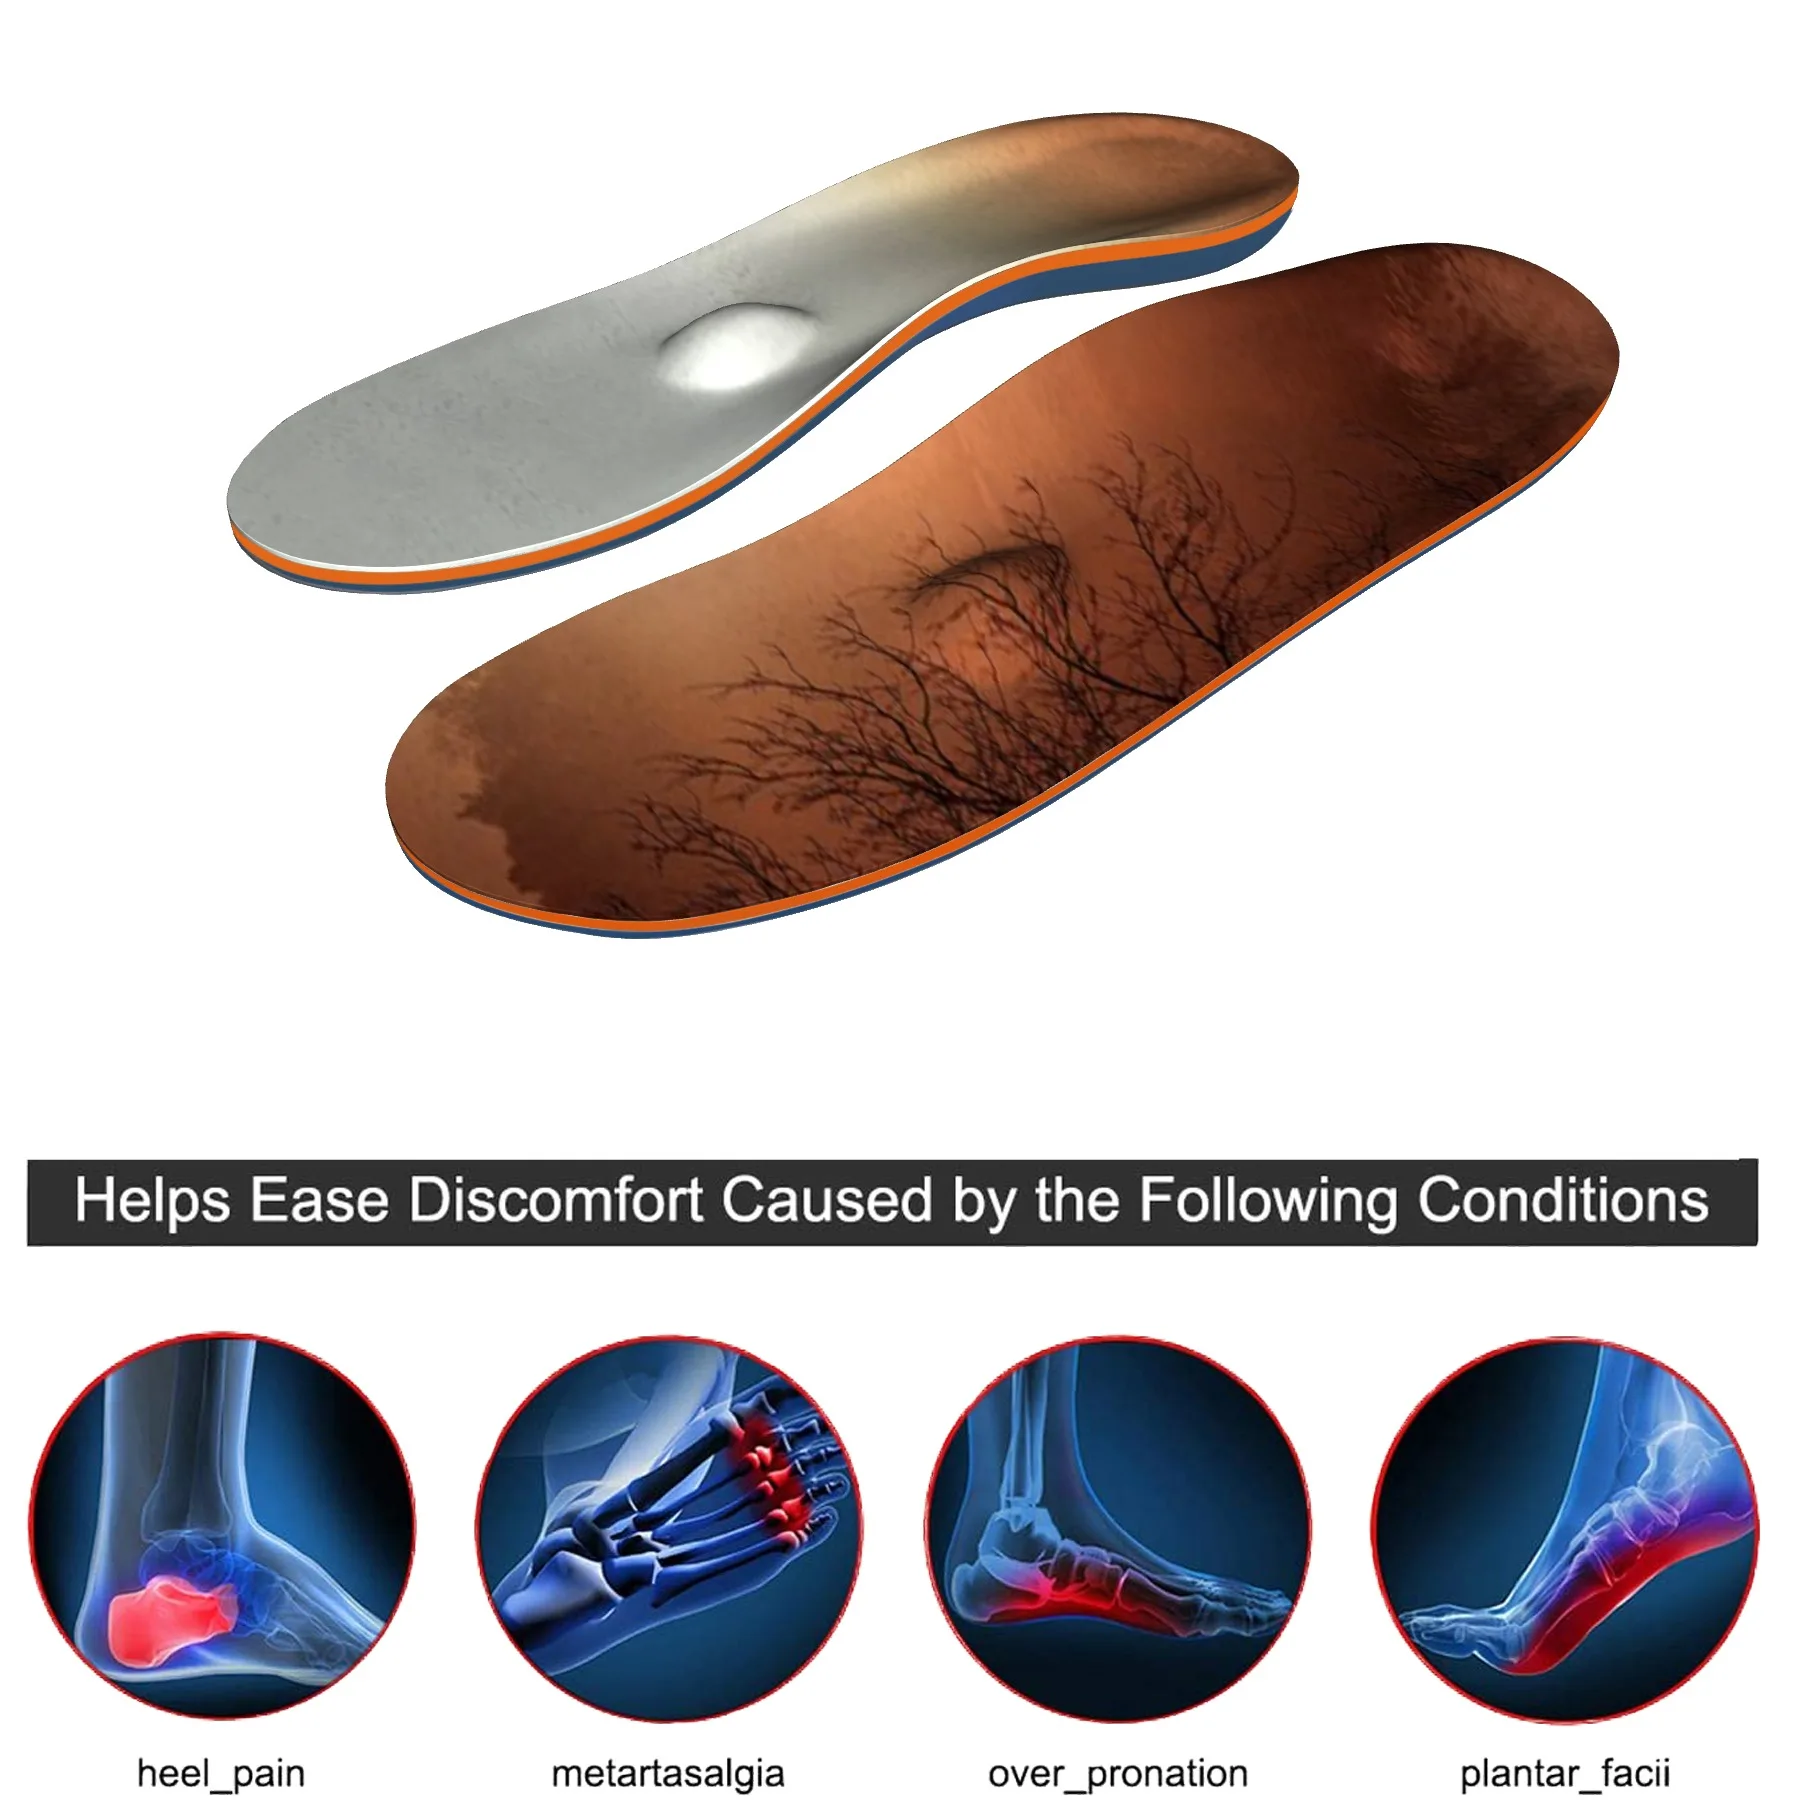 Customized flat feet, high arch support, orthopedic insoles, plantar fasciitis, foot sports, running insoles, insert pads